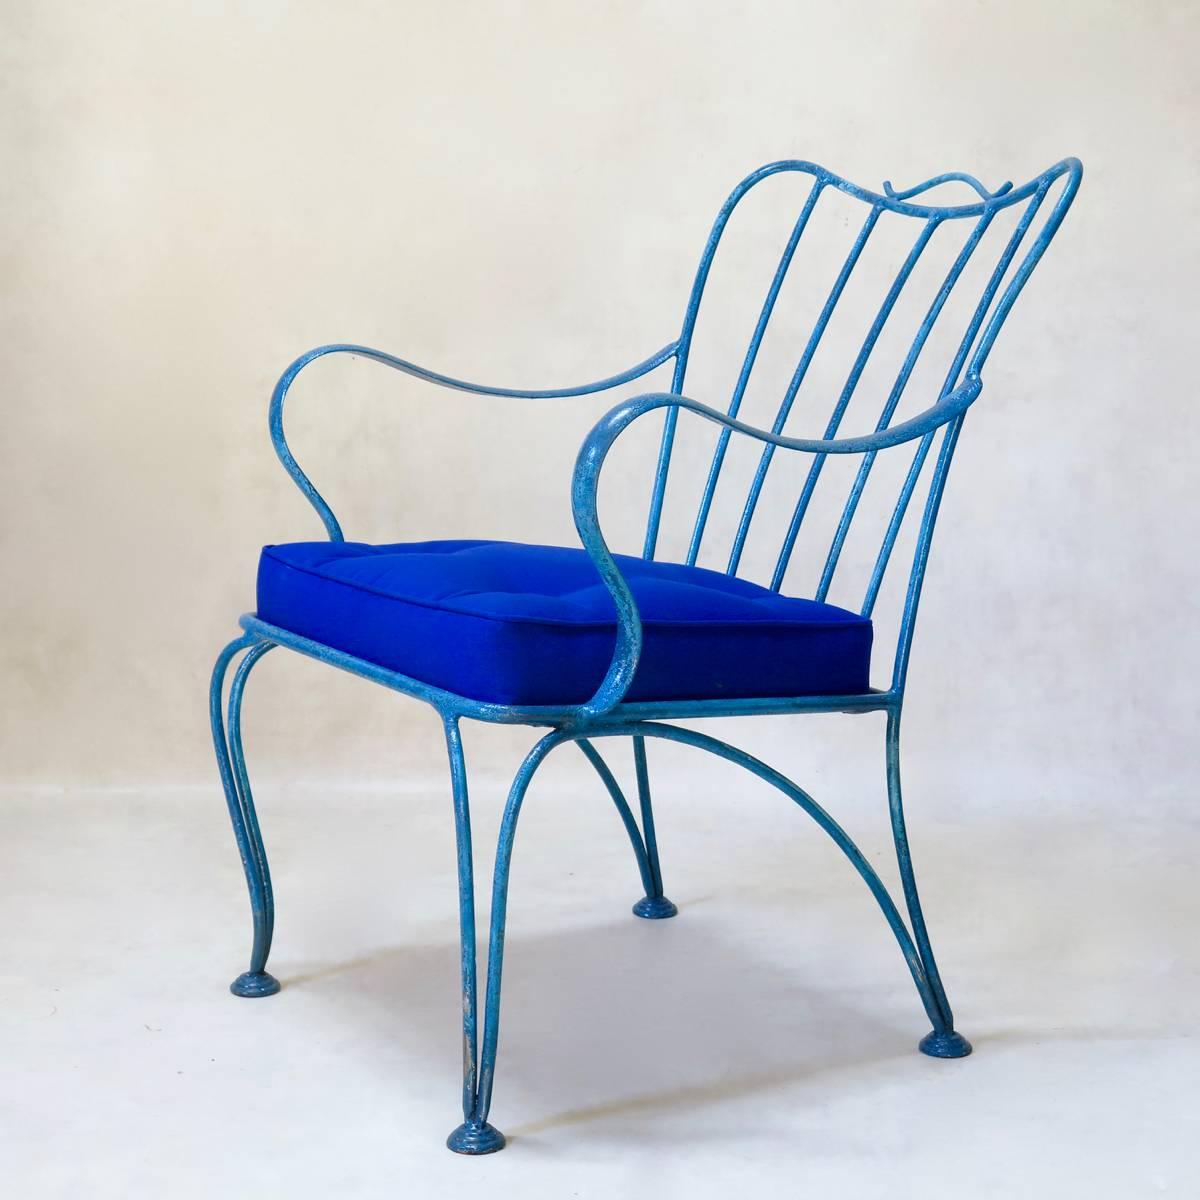 Set of four wide and comfortable outdoor lounge chairs of nice proportions, in striking blue-painted wrought iron, with royal blue canvas seat cushions. Cabriole front legs, and splayed back legs. Gerat lines.